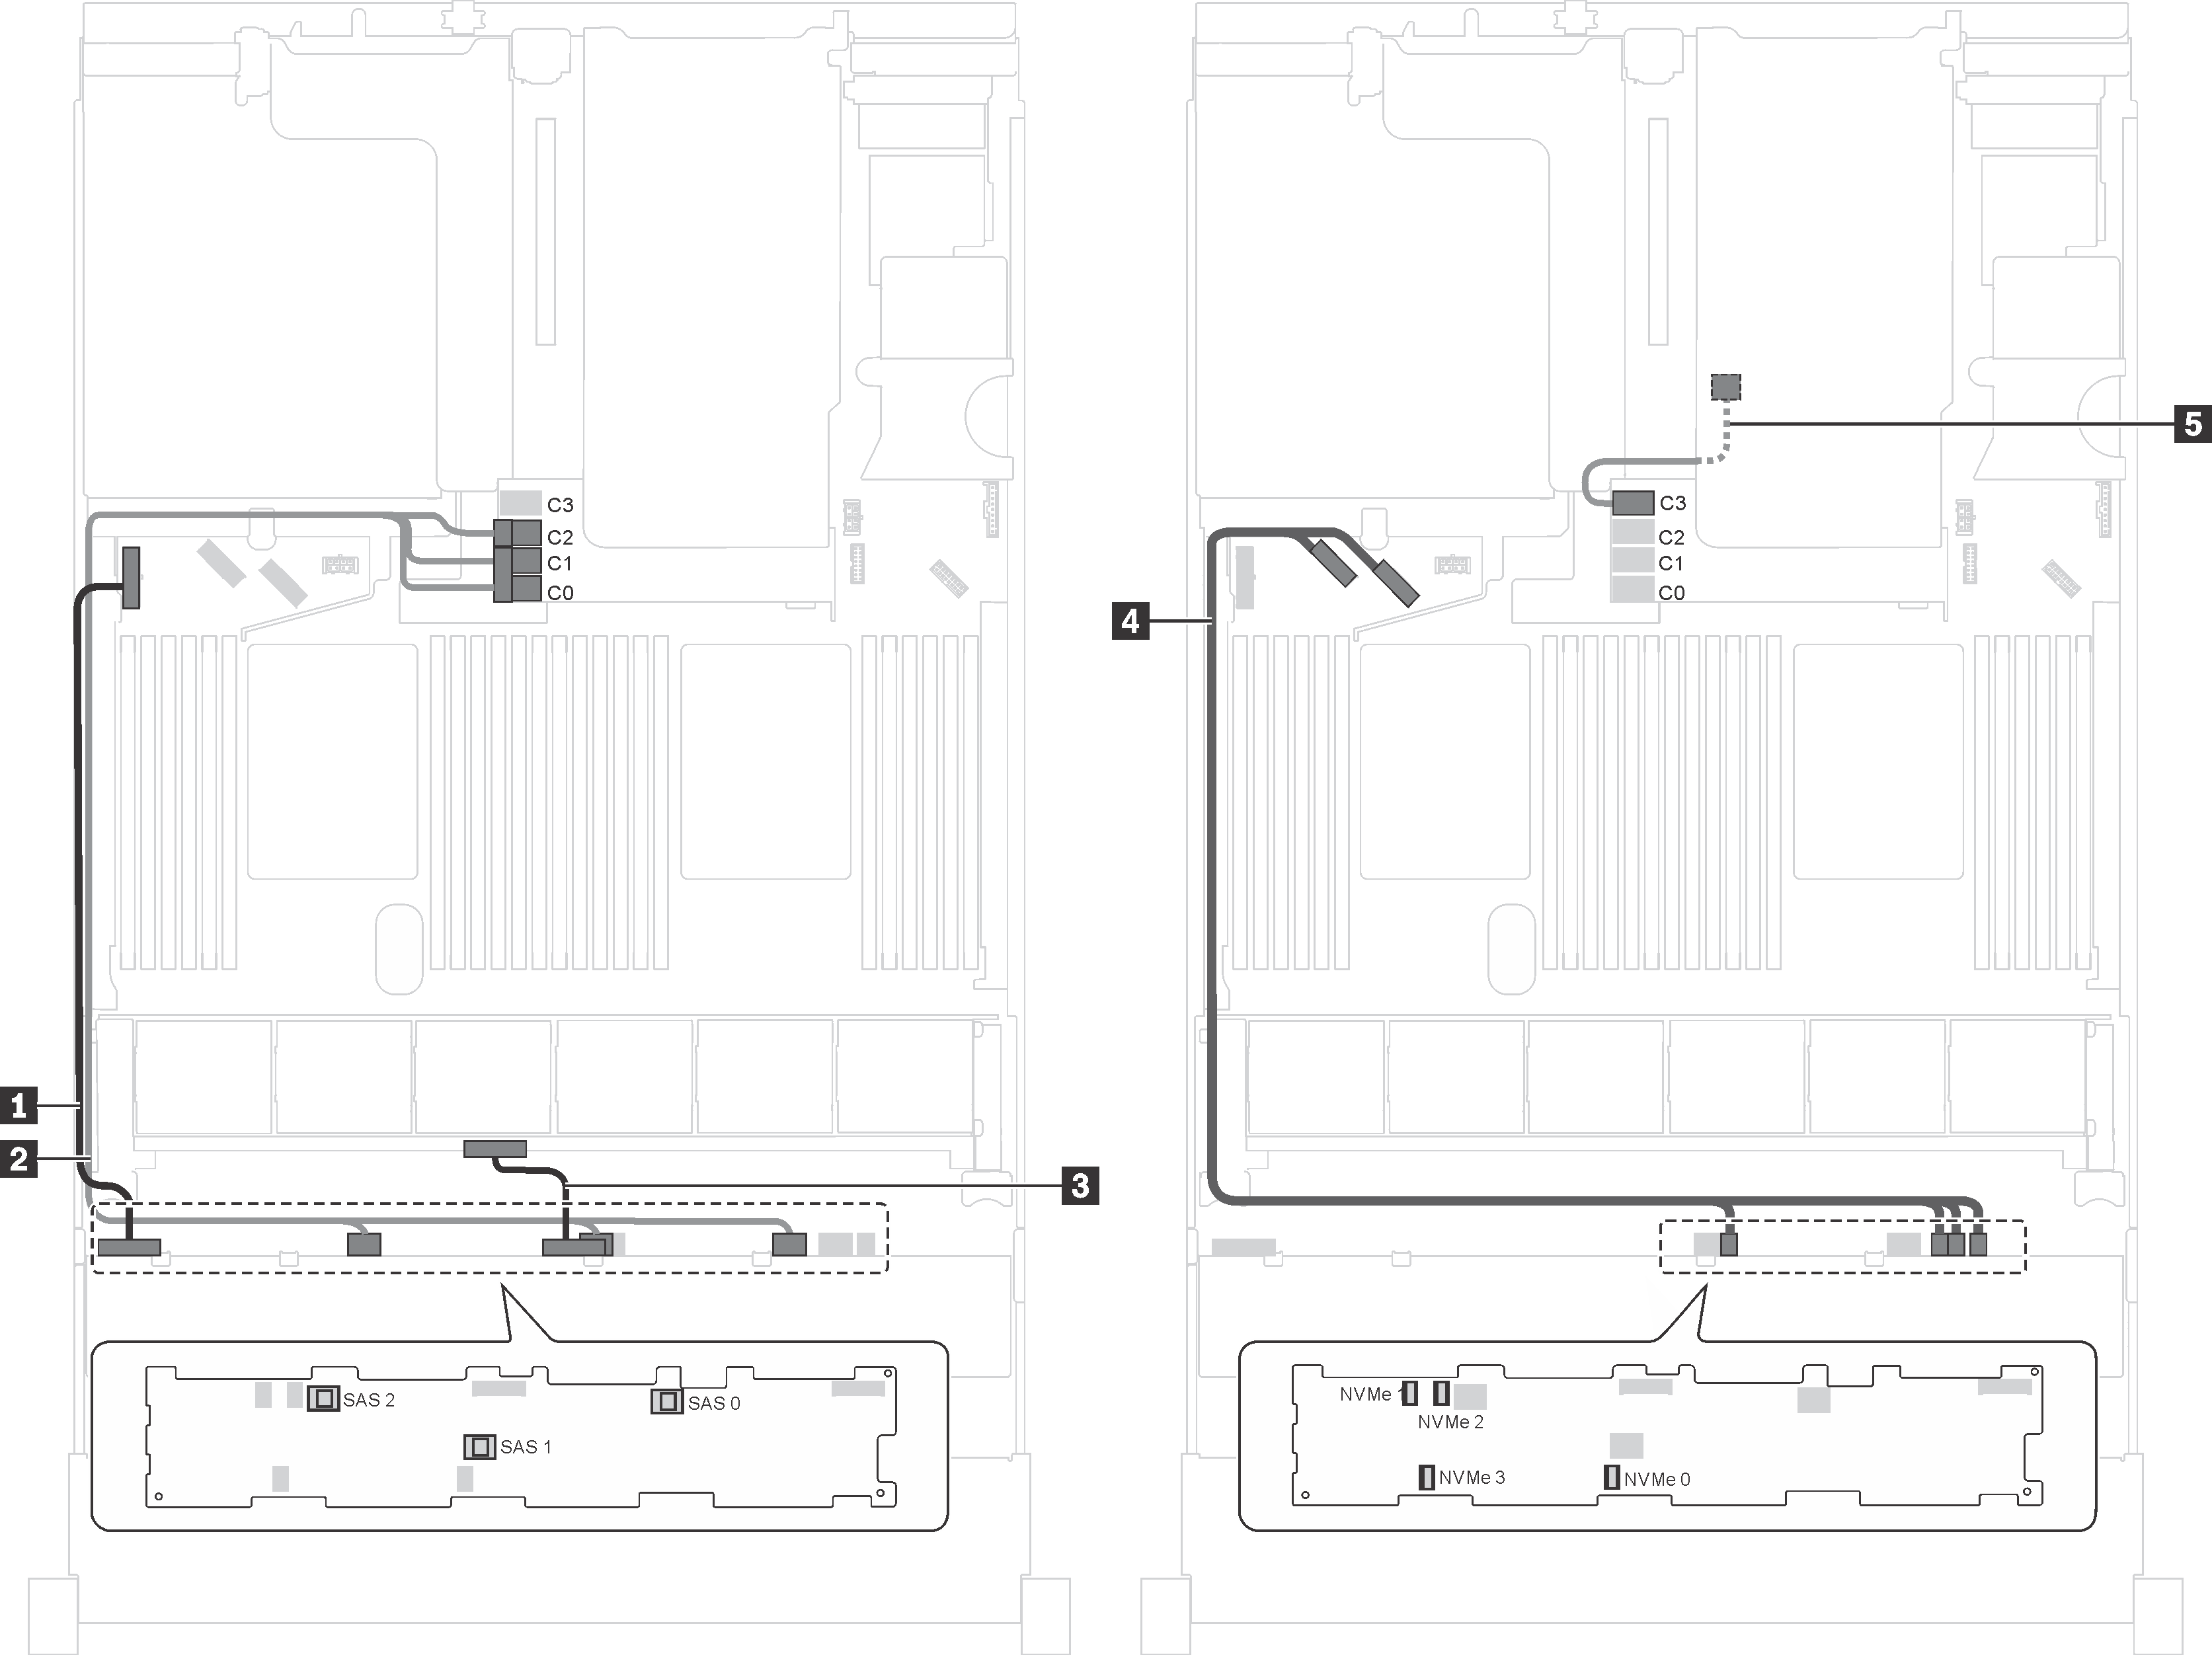 Cable routing for server models with eight 3.5-inch SAS/SATA drives, four 3.5-inch SAS/SATA/NVMe drives, the rear hot-swap drive assembly, and one Gen 3 16i HBA/RAID adapter